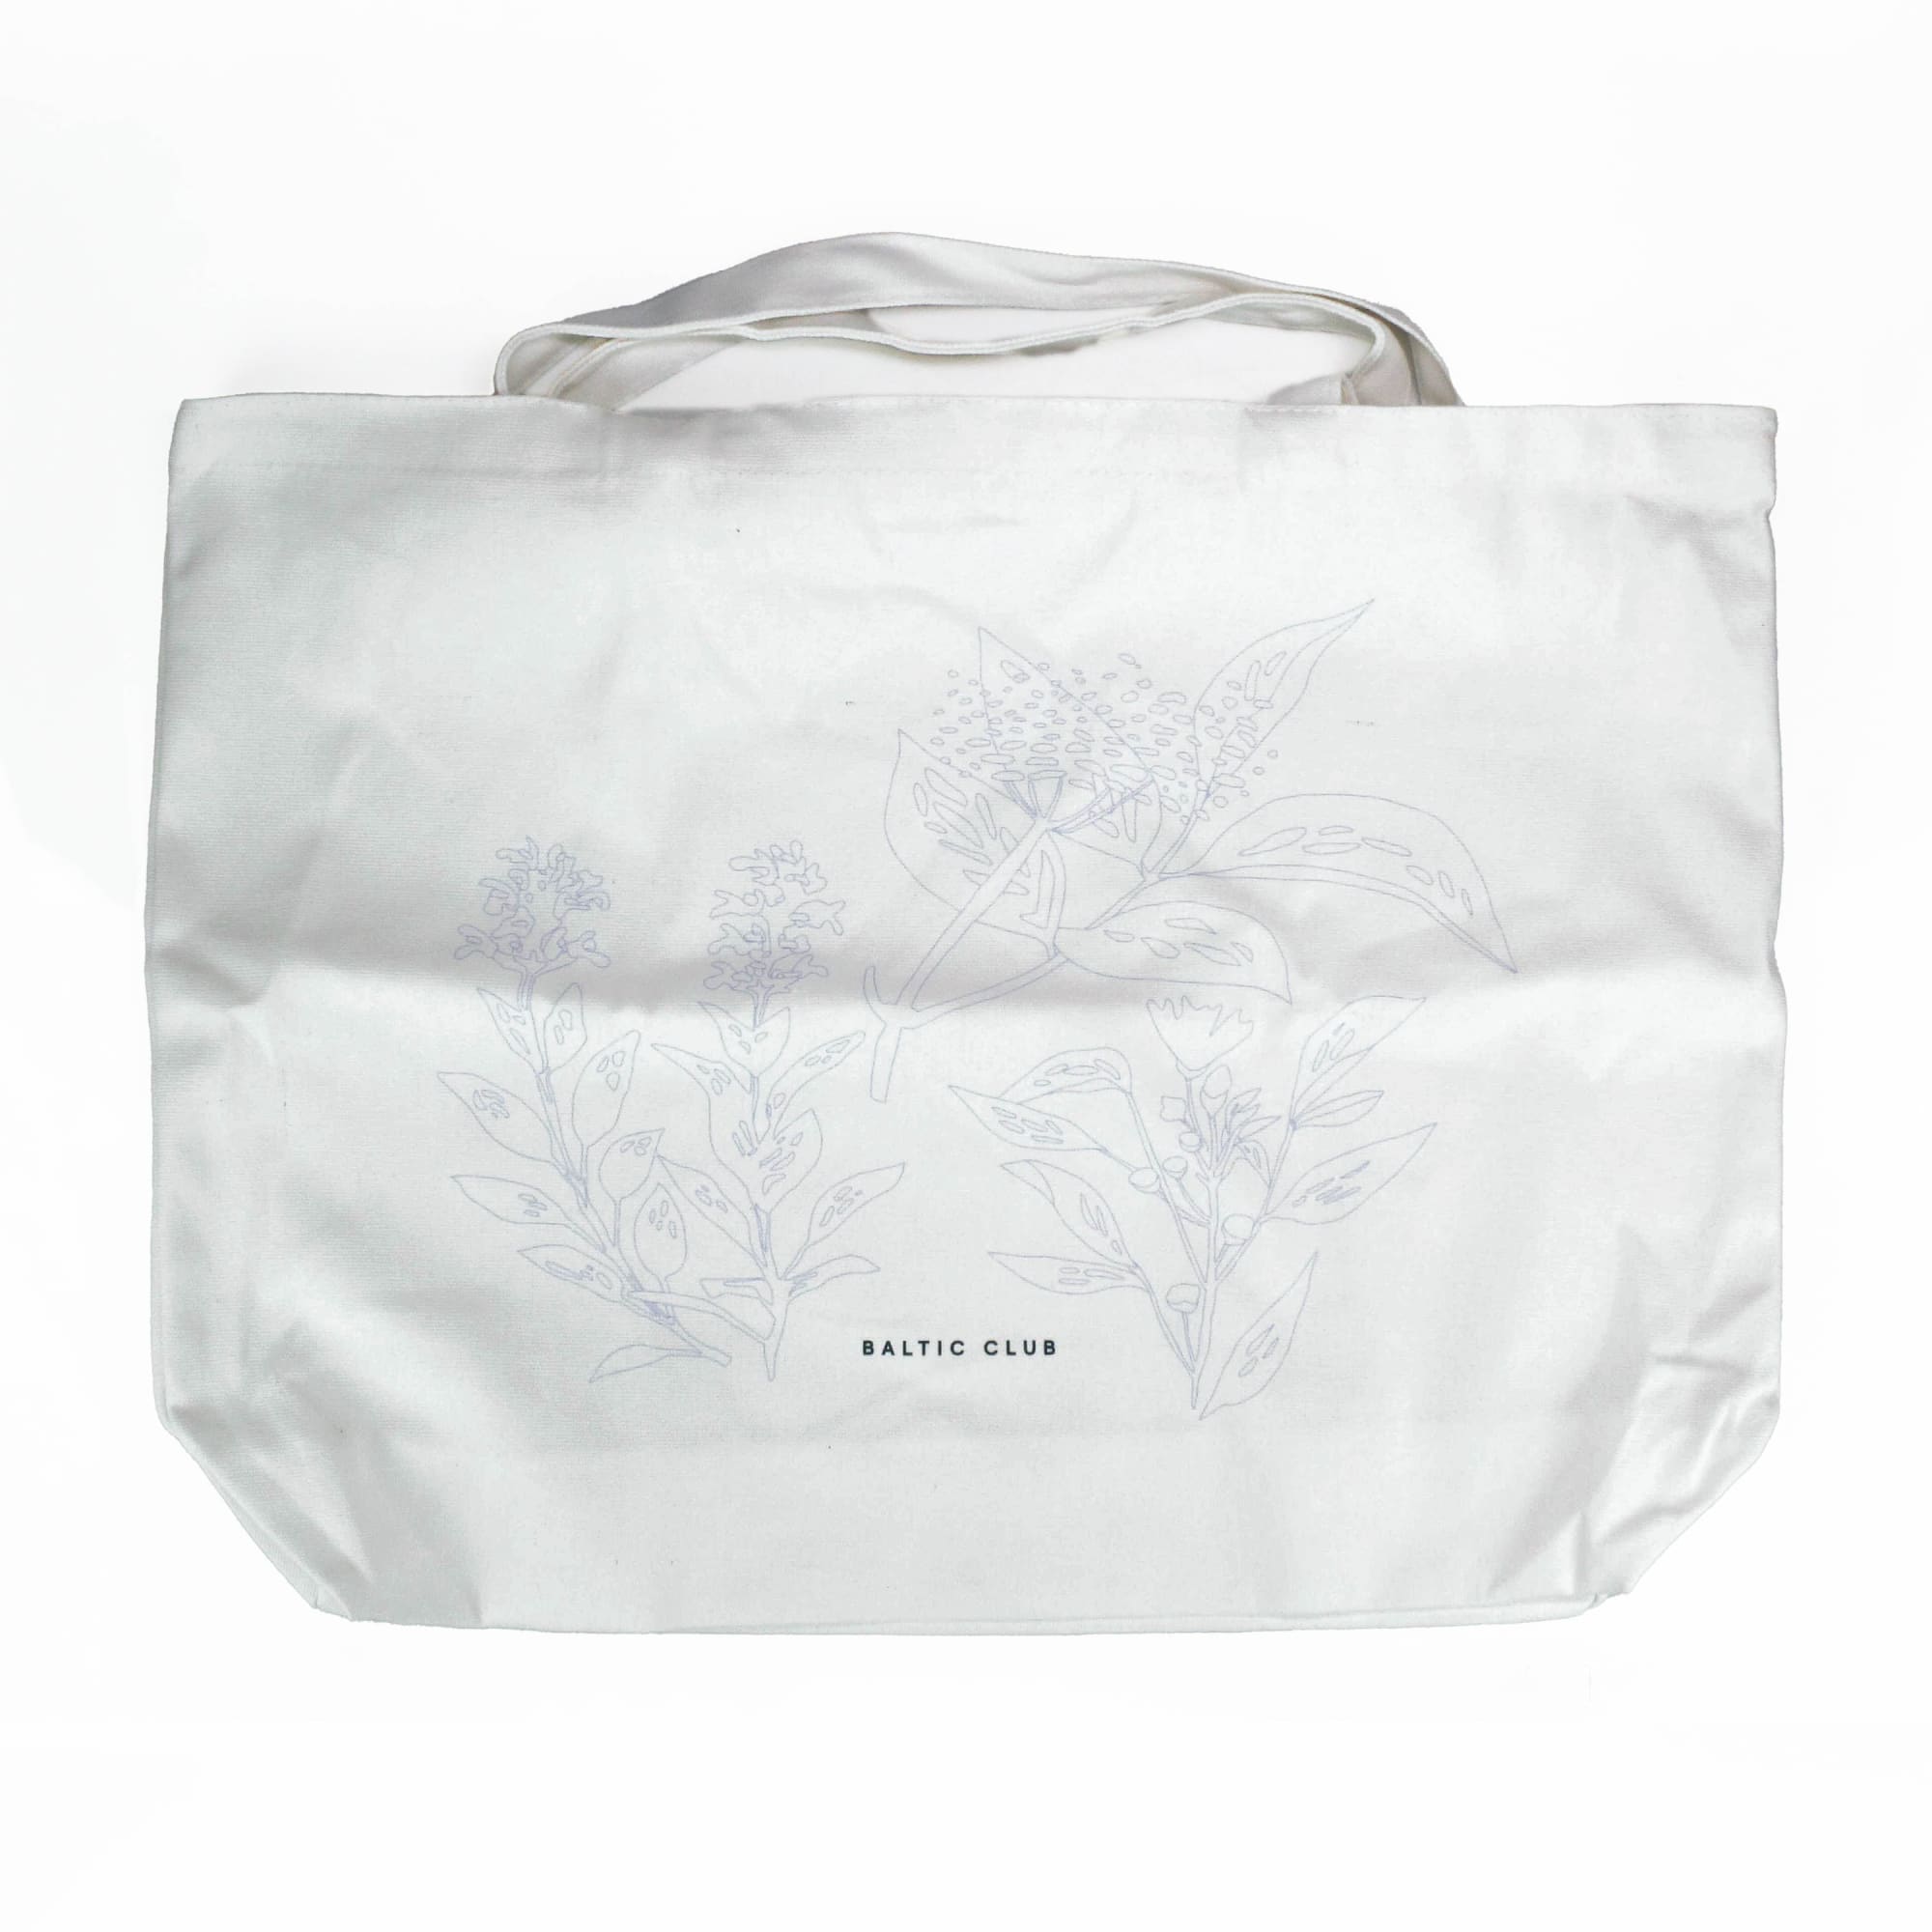 The tote bag, included in the kit, ready to be embroidered